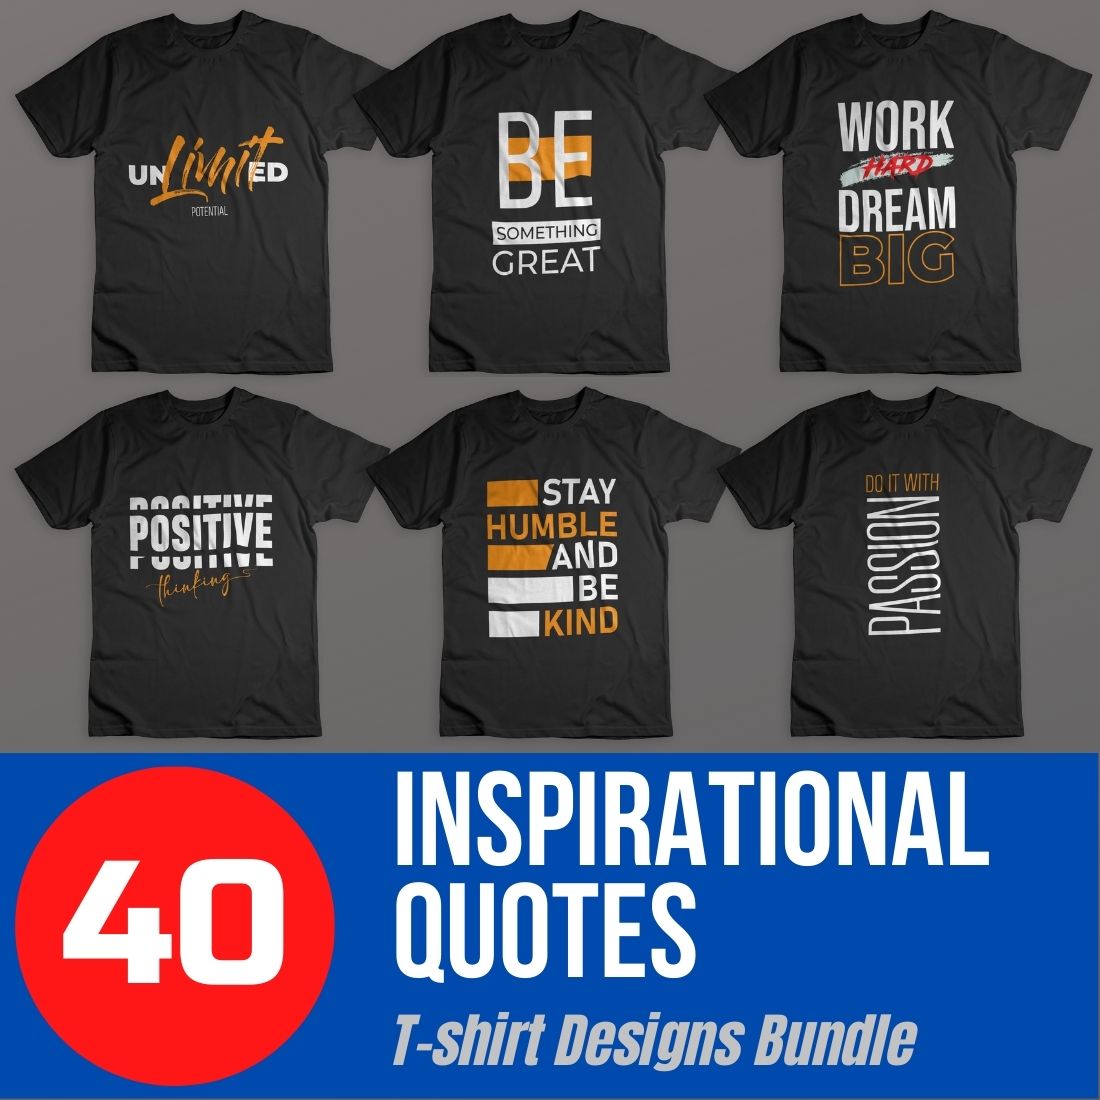 40 Inspirational Quotes Typography T-shirt Designs Bundle cover image.